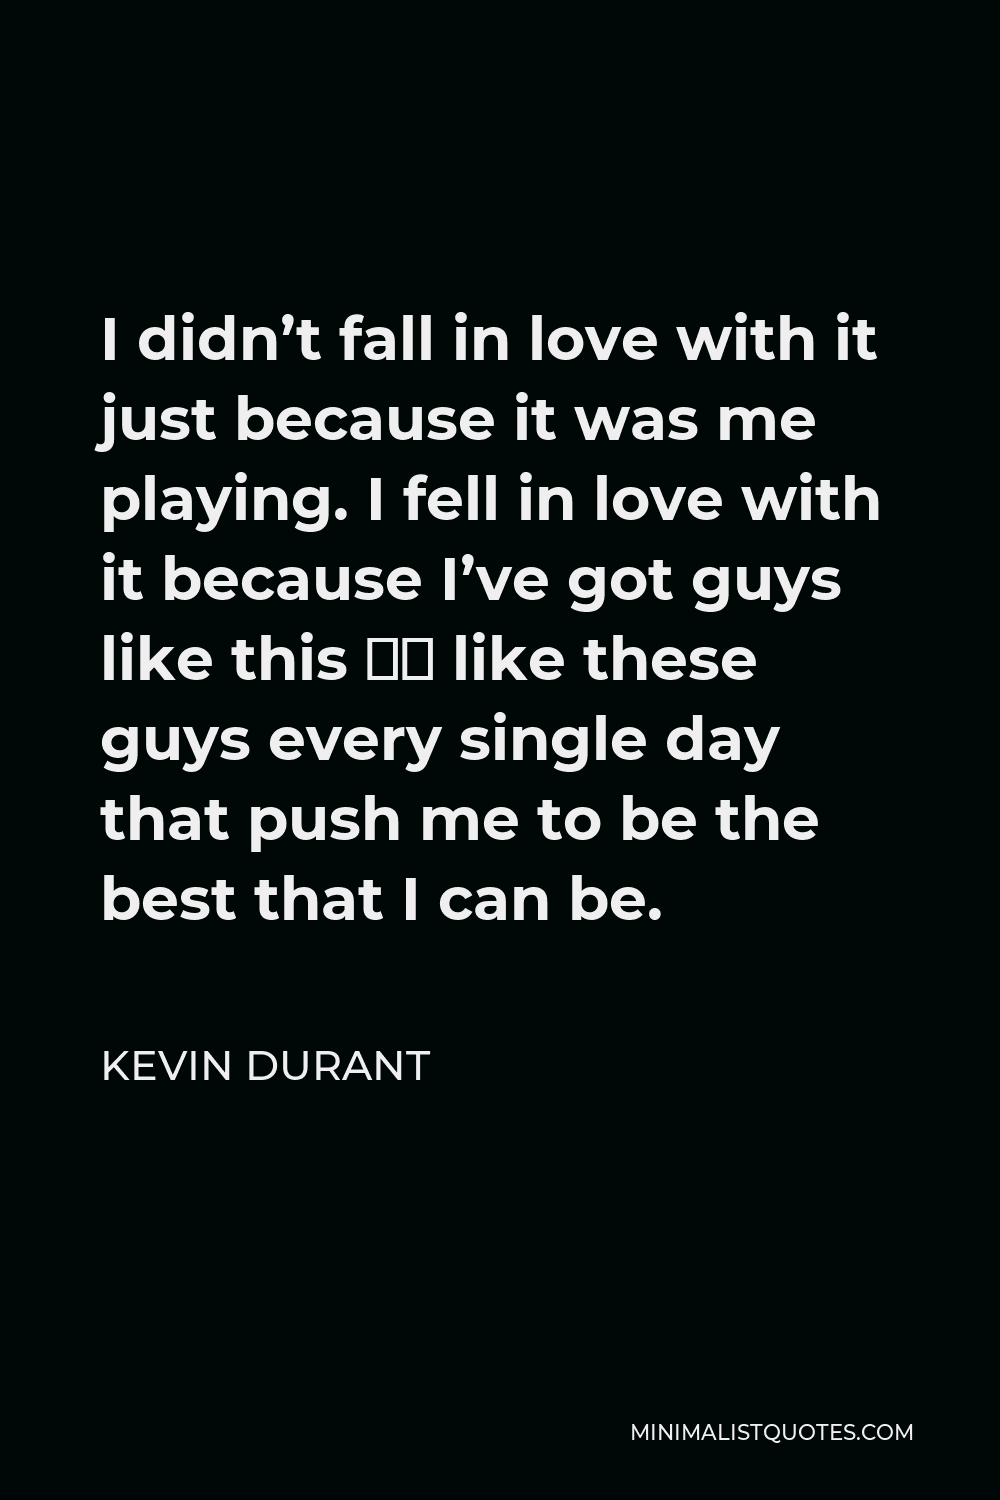 Kevin Durant Quote - I didn’t fall in love with it just because it was me playing. I fell in love with it because I’ve got guys like this – like these guys every single day that push me to be the best that I can be.